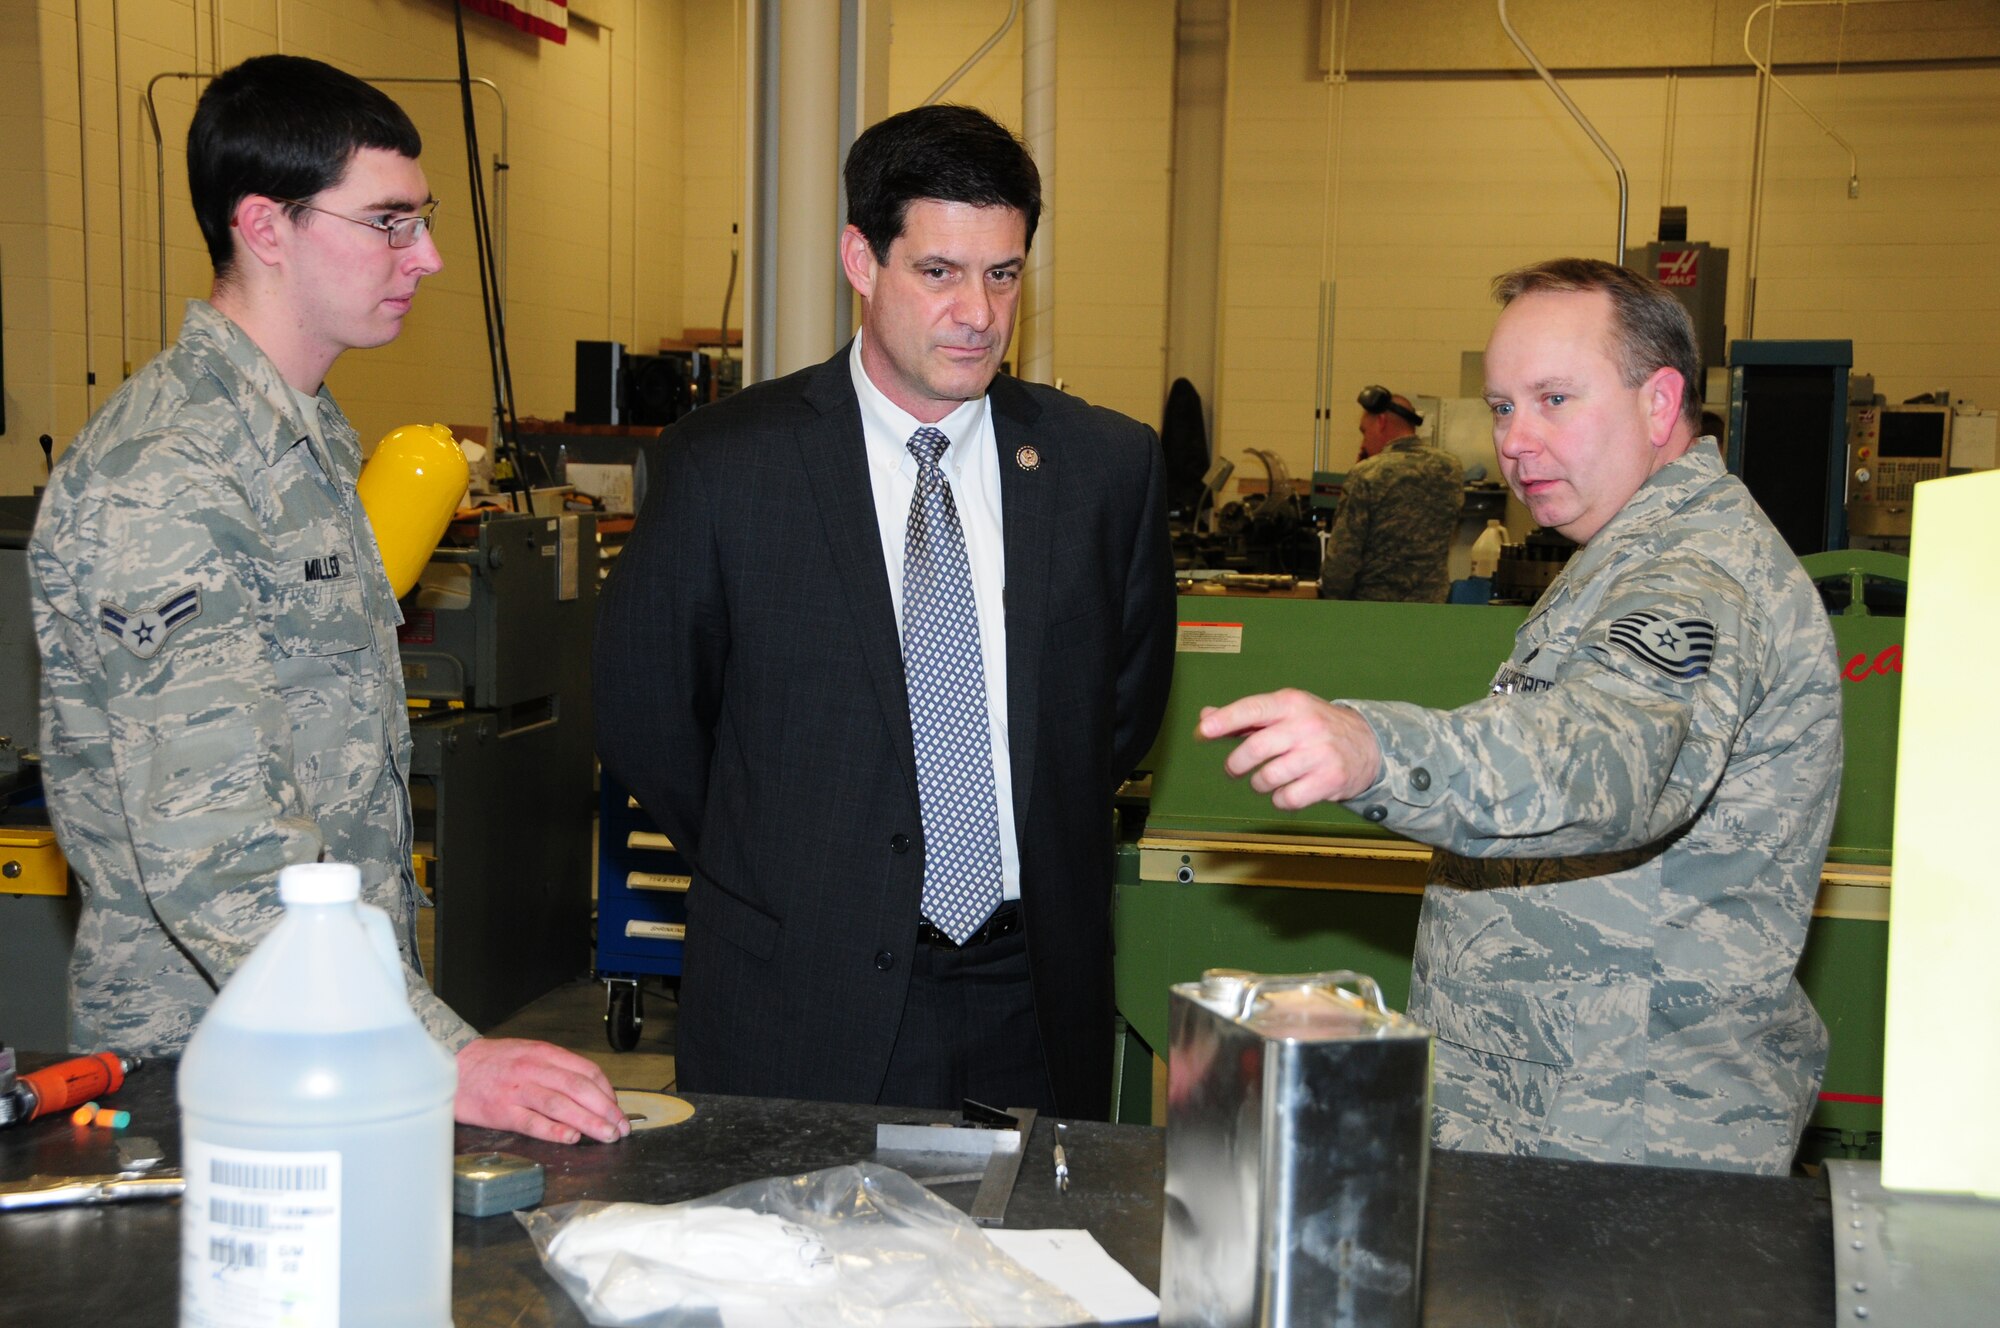 Congressman Cravaack visits with Airman from the 148th Fighter Wing, Maintenance Squadron, sheet metal and fabrication shop located in Duluth, Minn.  Congressman Cravaack is visiting the 148th FW less than one month after being sworn into office.  (U.S. Air Force photo by Master Sgt. Ralph J. Kapustka)  (Released)